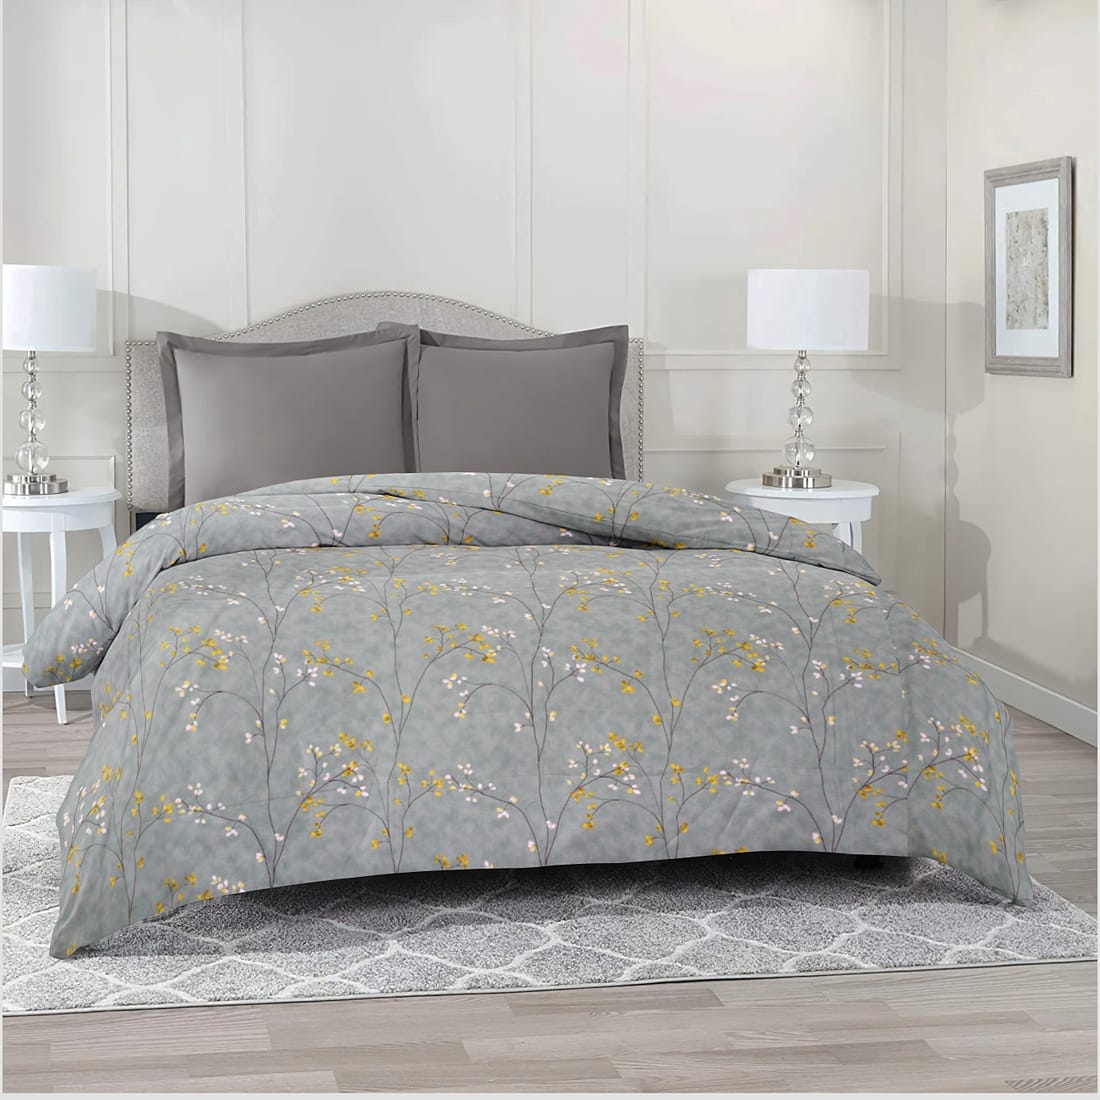 Comfy 250 TC Grey Floral Print Cotton Duvet Cover/Quilt Cover online in India